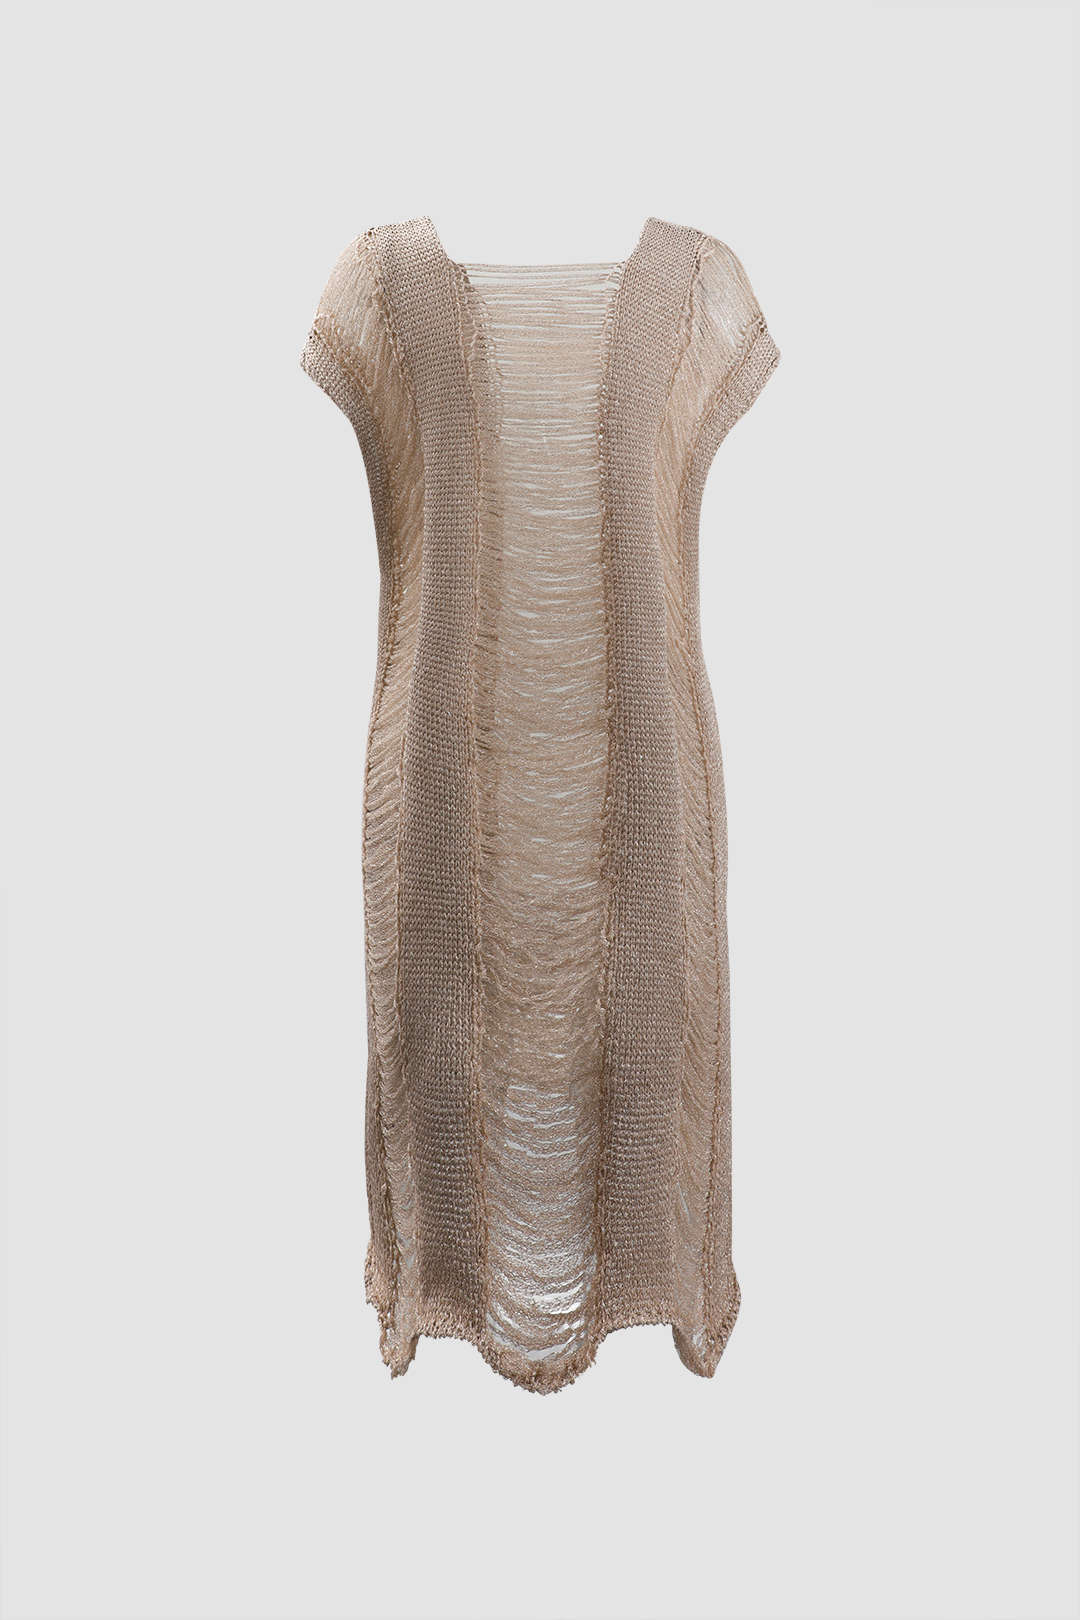 Laddered Knit Cover Up Dress